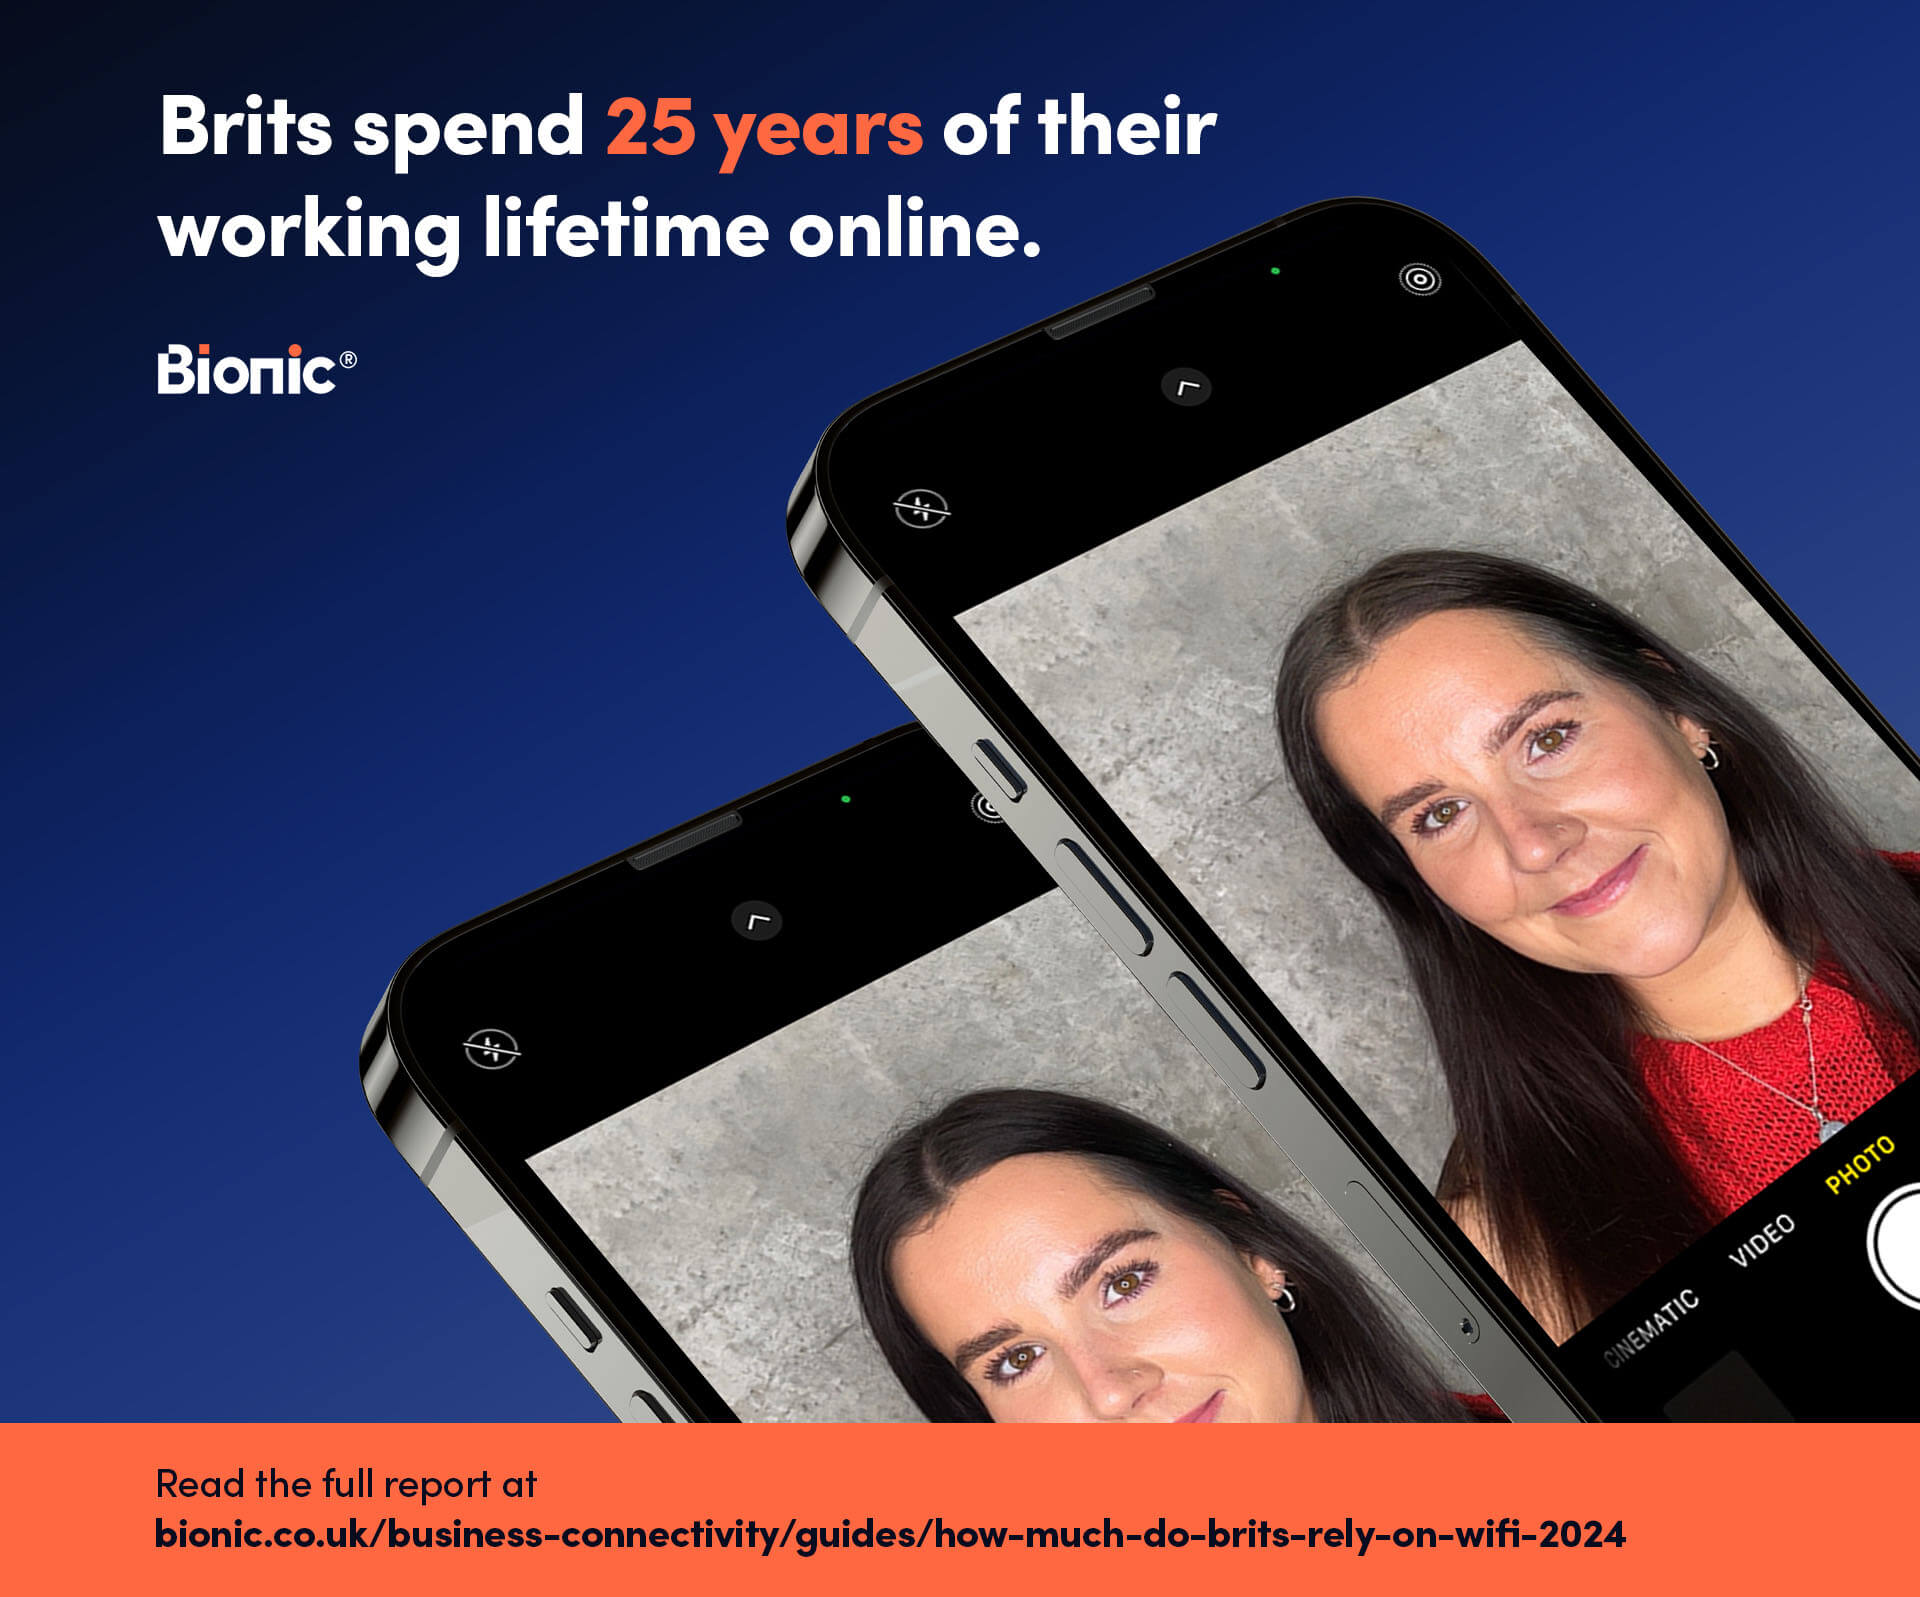 Infographic with text - Brits spend 25 years of their working lifetime online